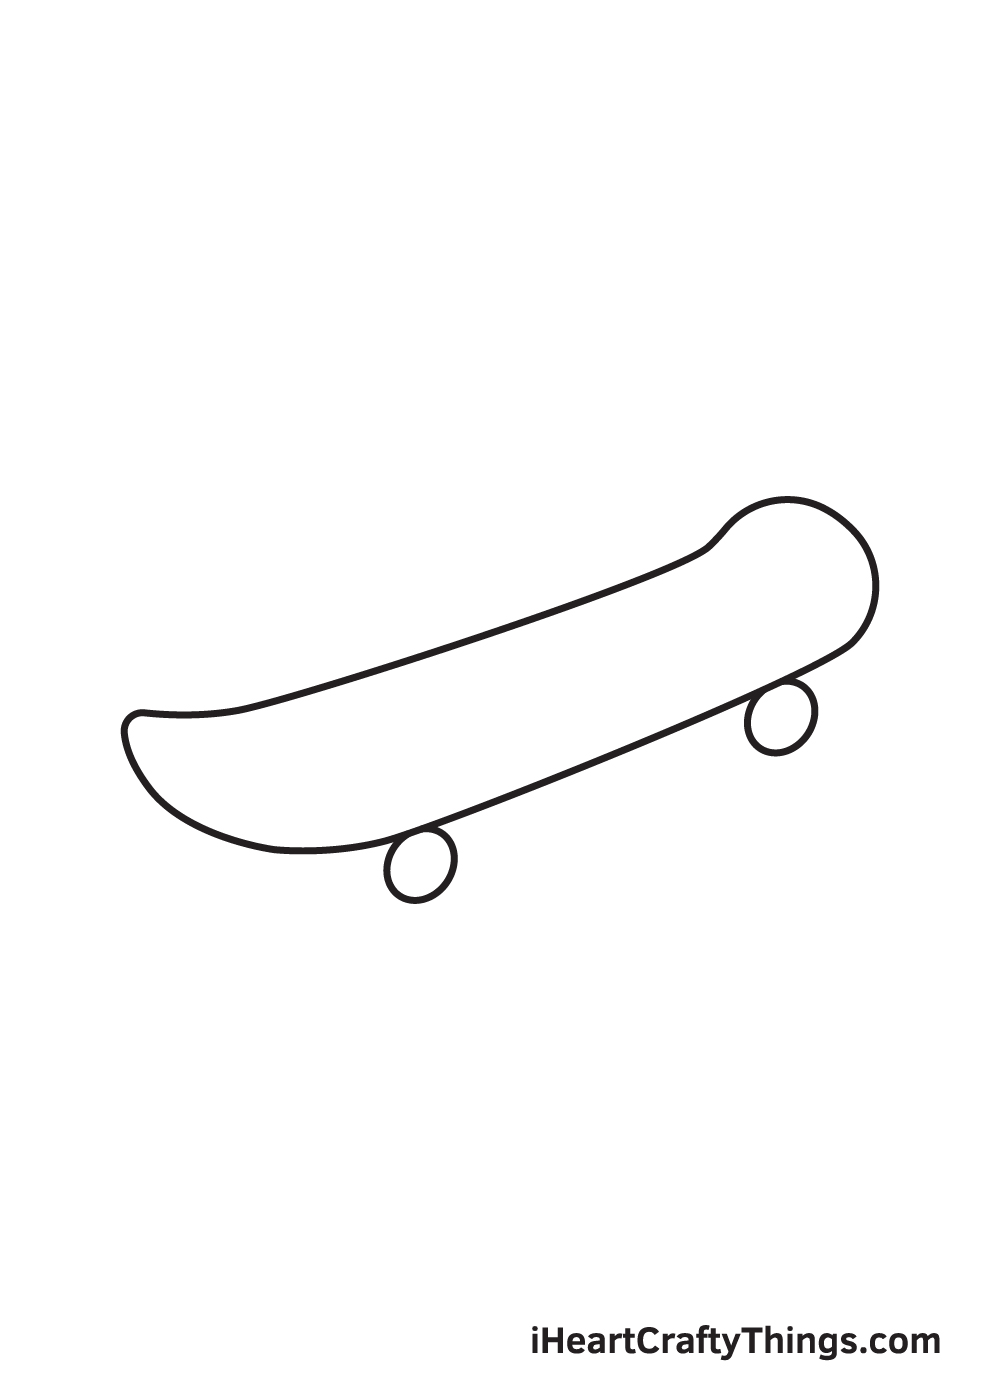 Top How To Draw Skateboard Logos Step By Step in the world The ultimate guide 